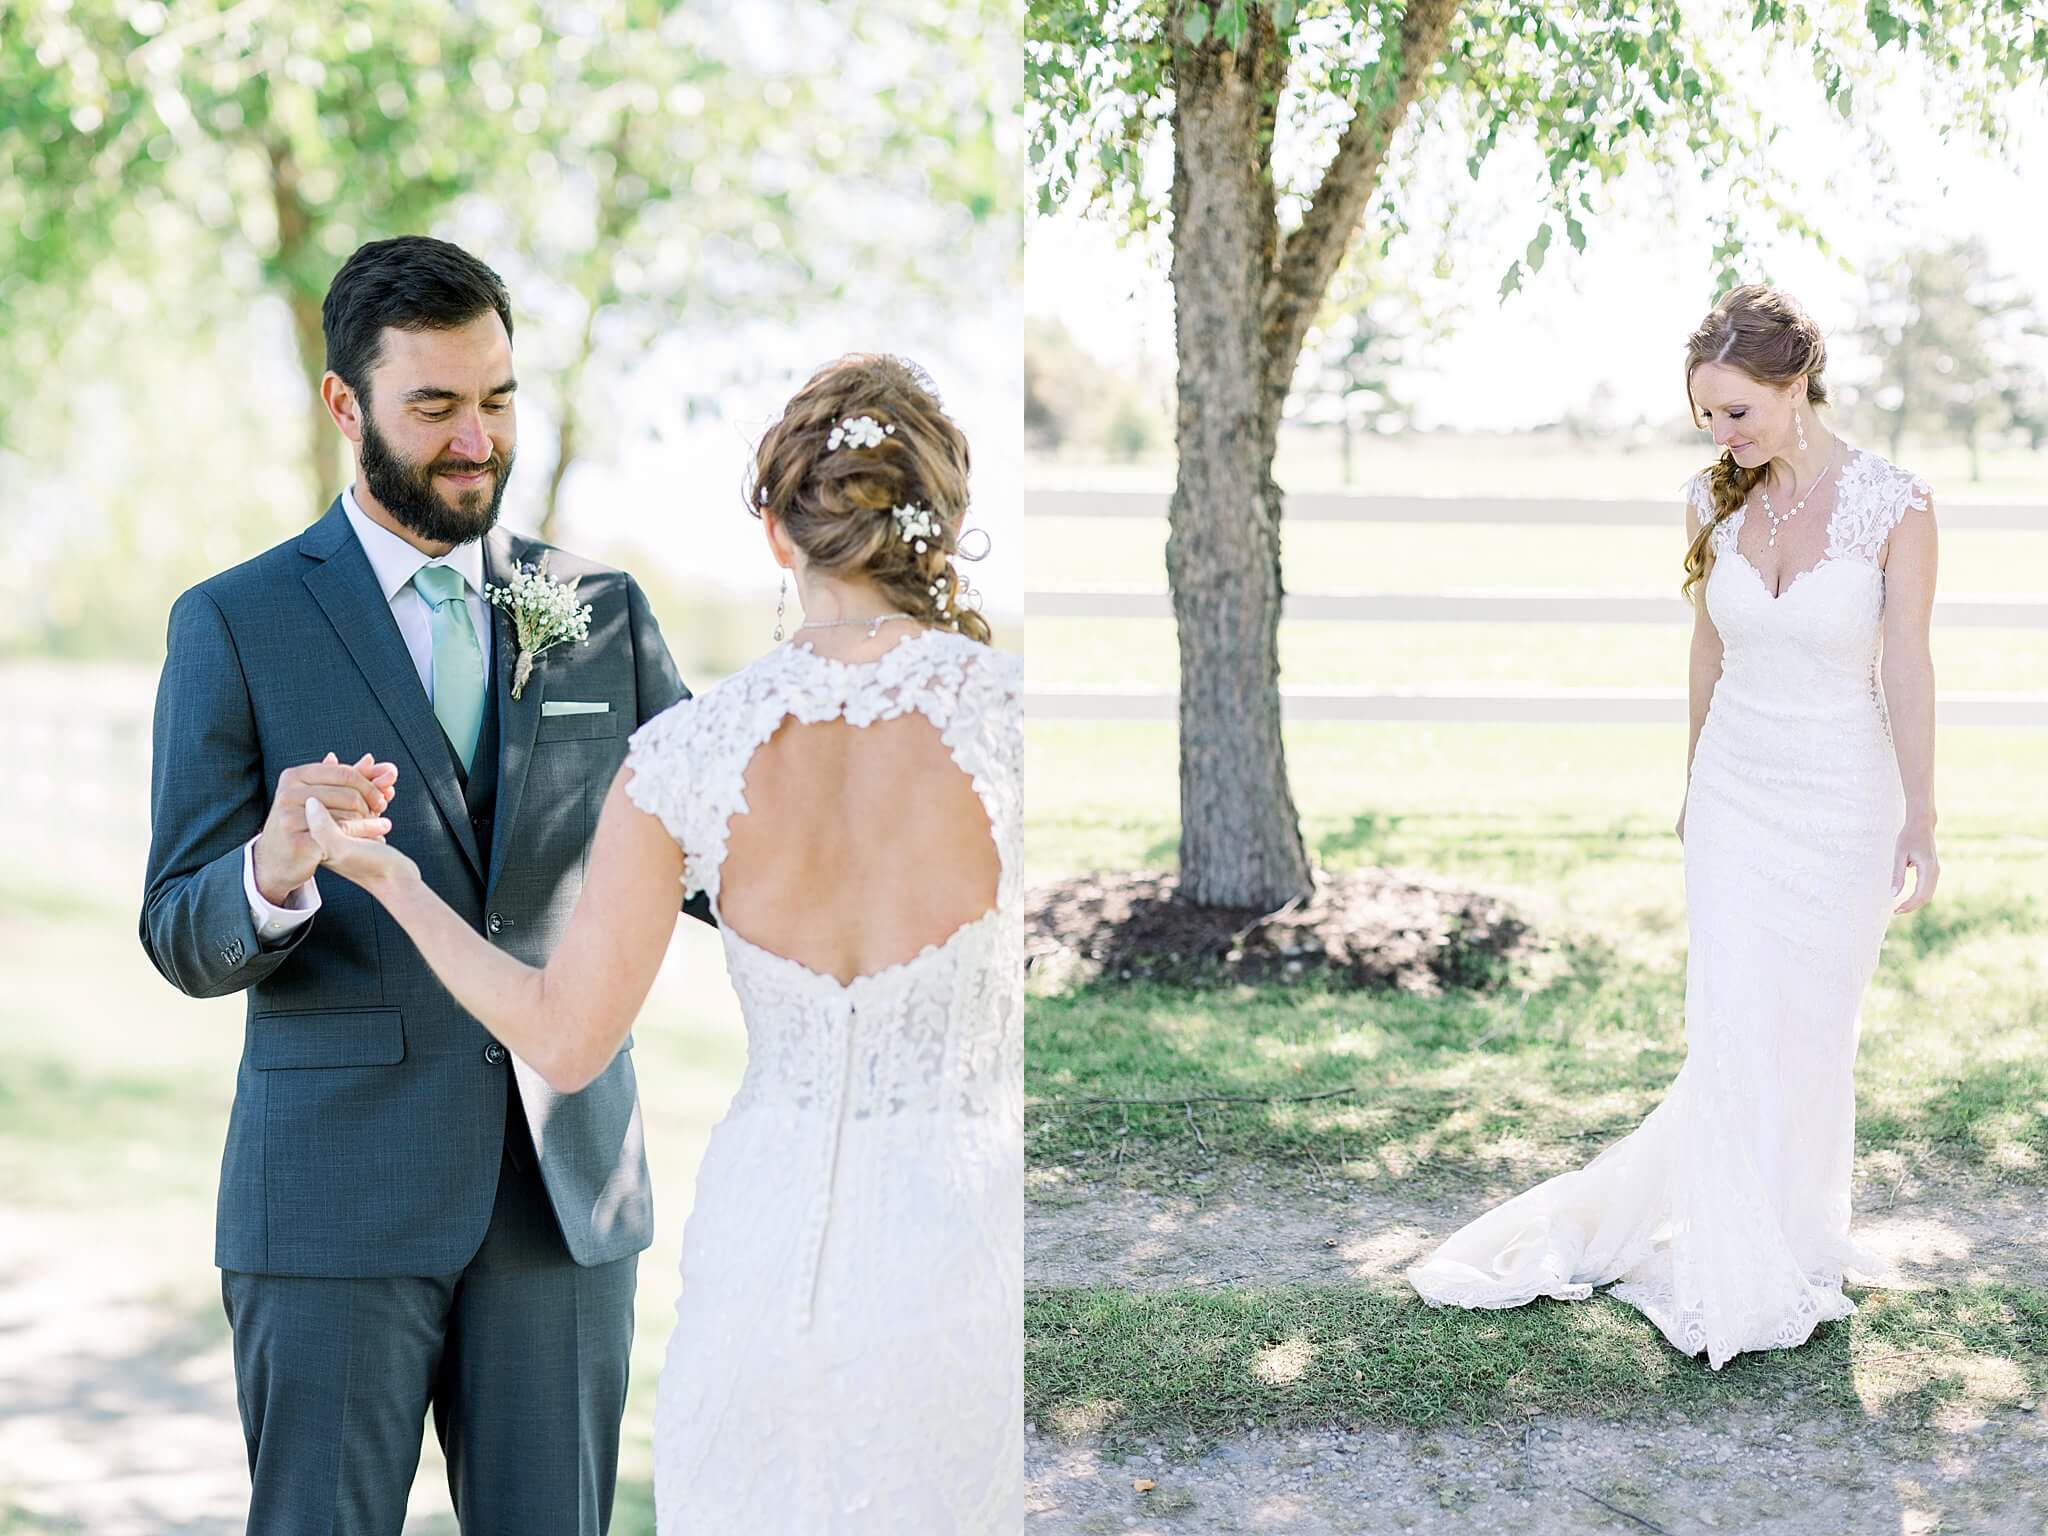 Bride shows off her dress to groom during first look at Crooked Creek Ranch wedding.